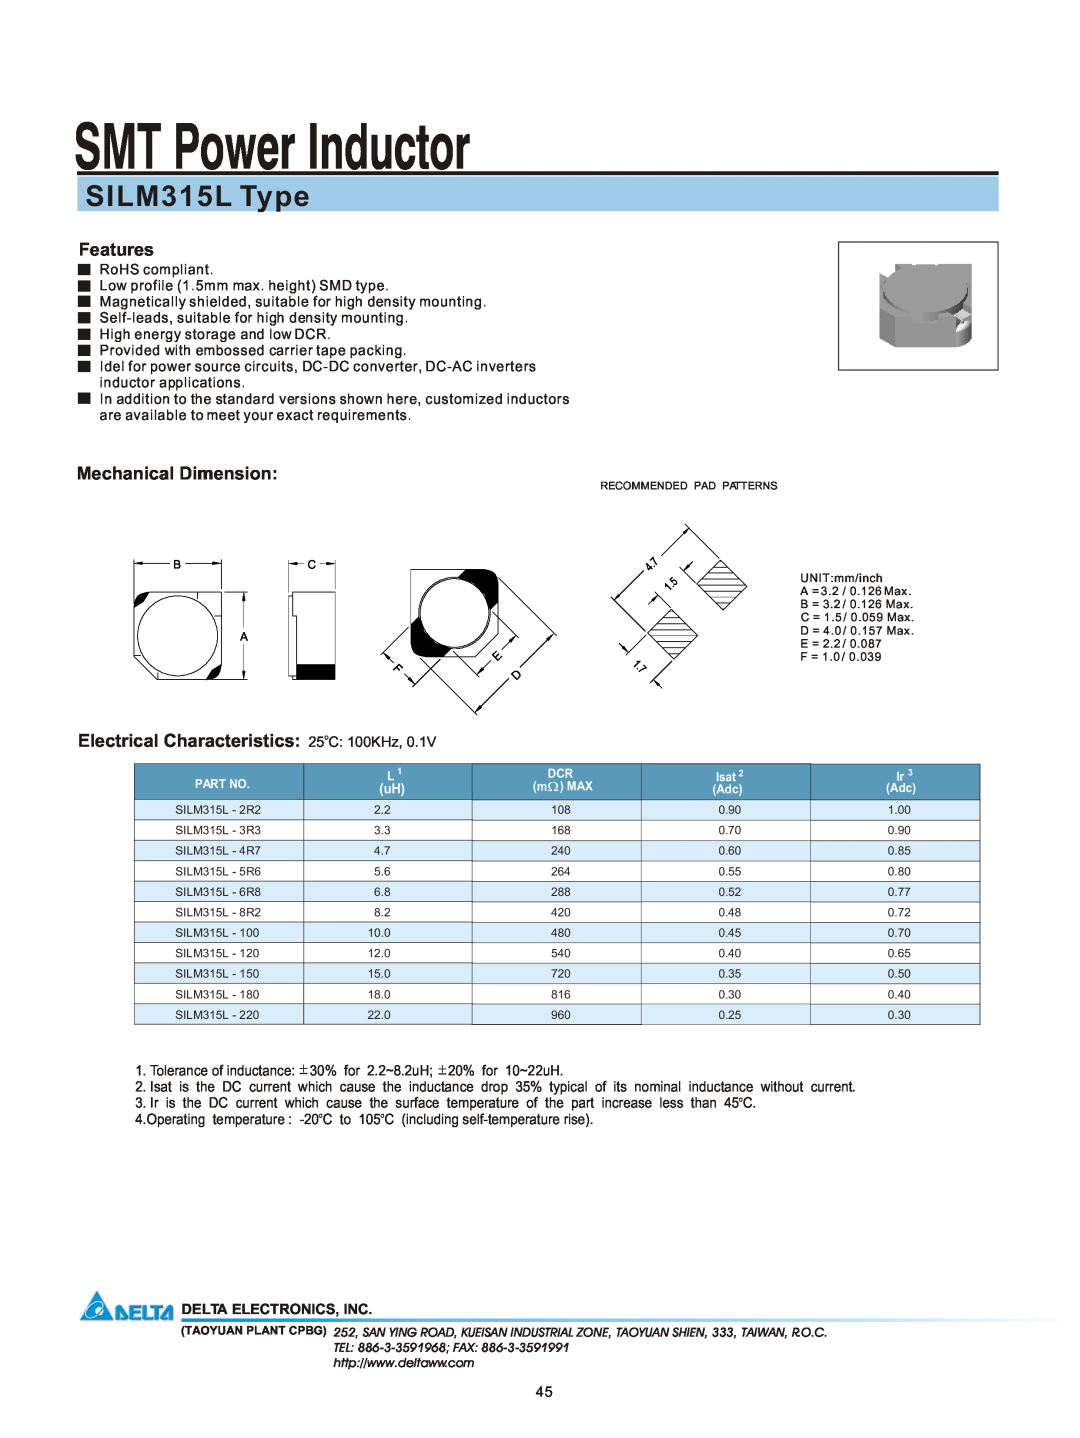 Delta Electronics manual SMT Power Inductor, SILM315L Type, Features, Mechanical Dimension, Delta Electronics, Inc 